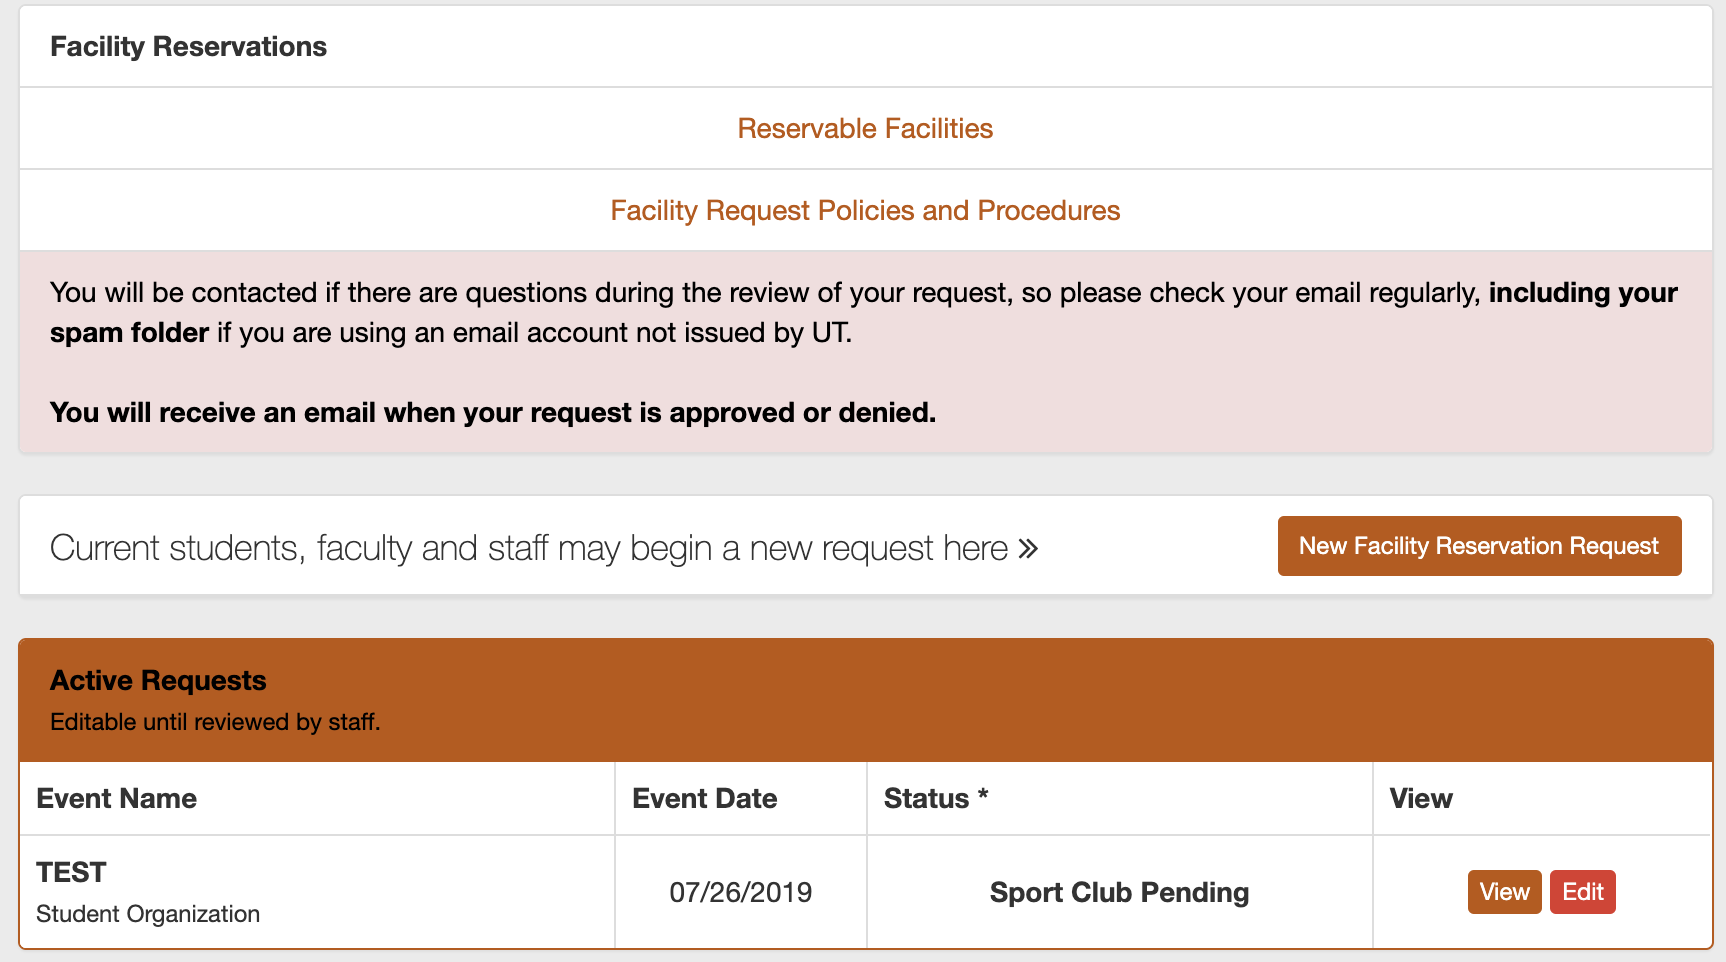 krokodille ankomme selvbiografi How to Submit Special Event Request - University of Texas Sport Club  Association - UT Austin Wikis